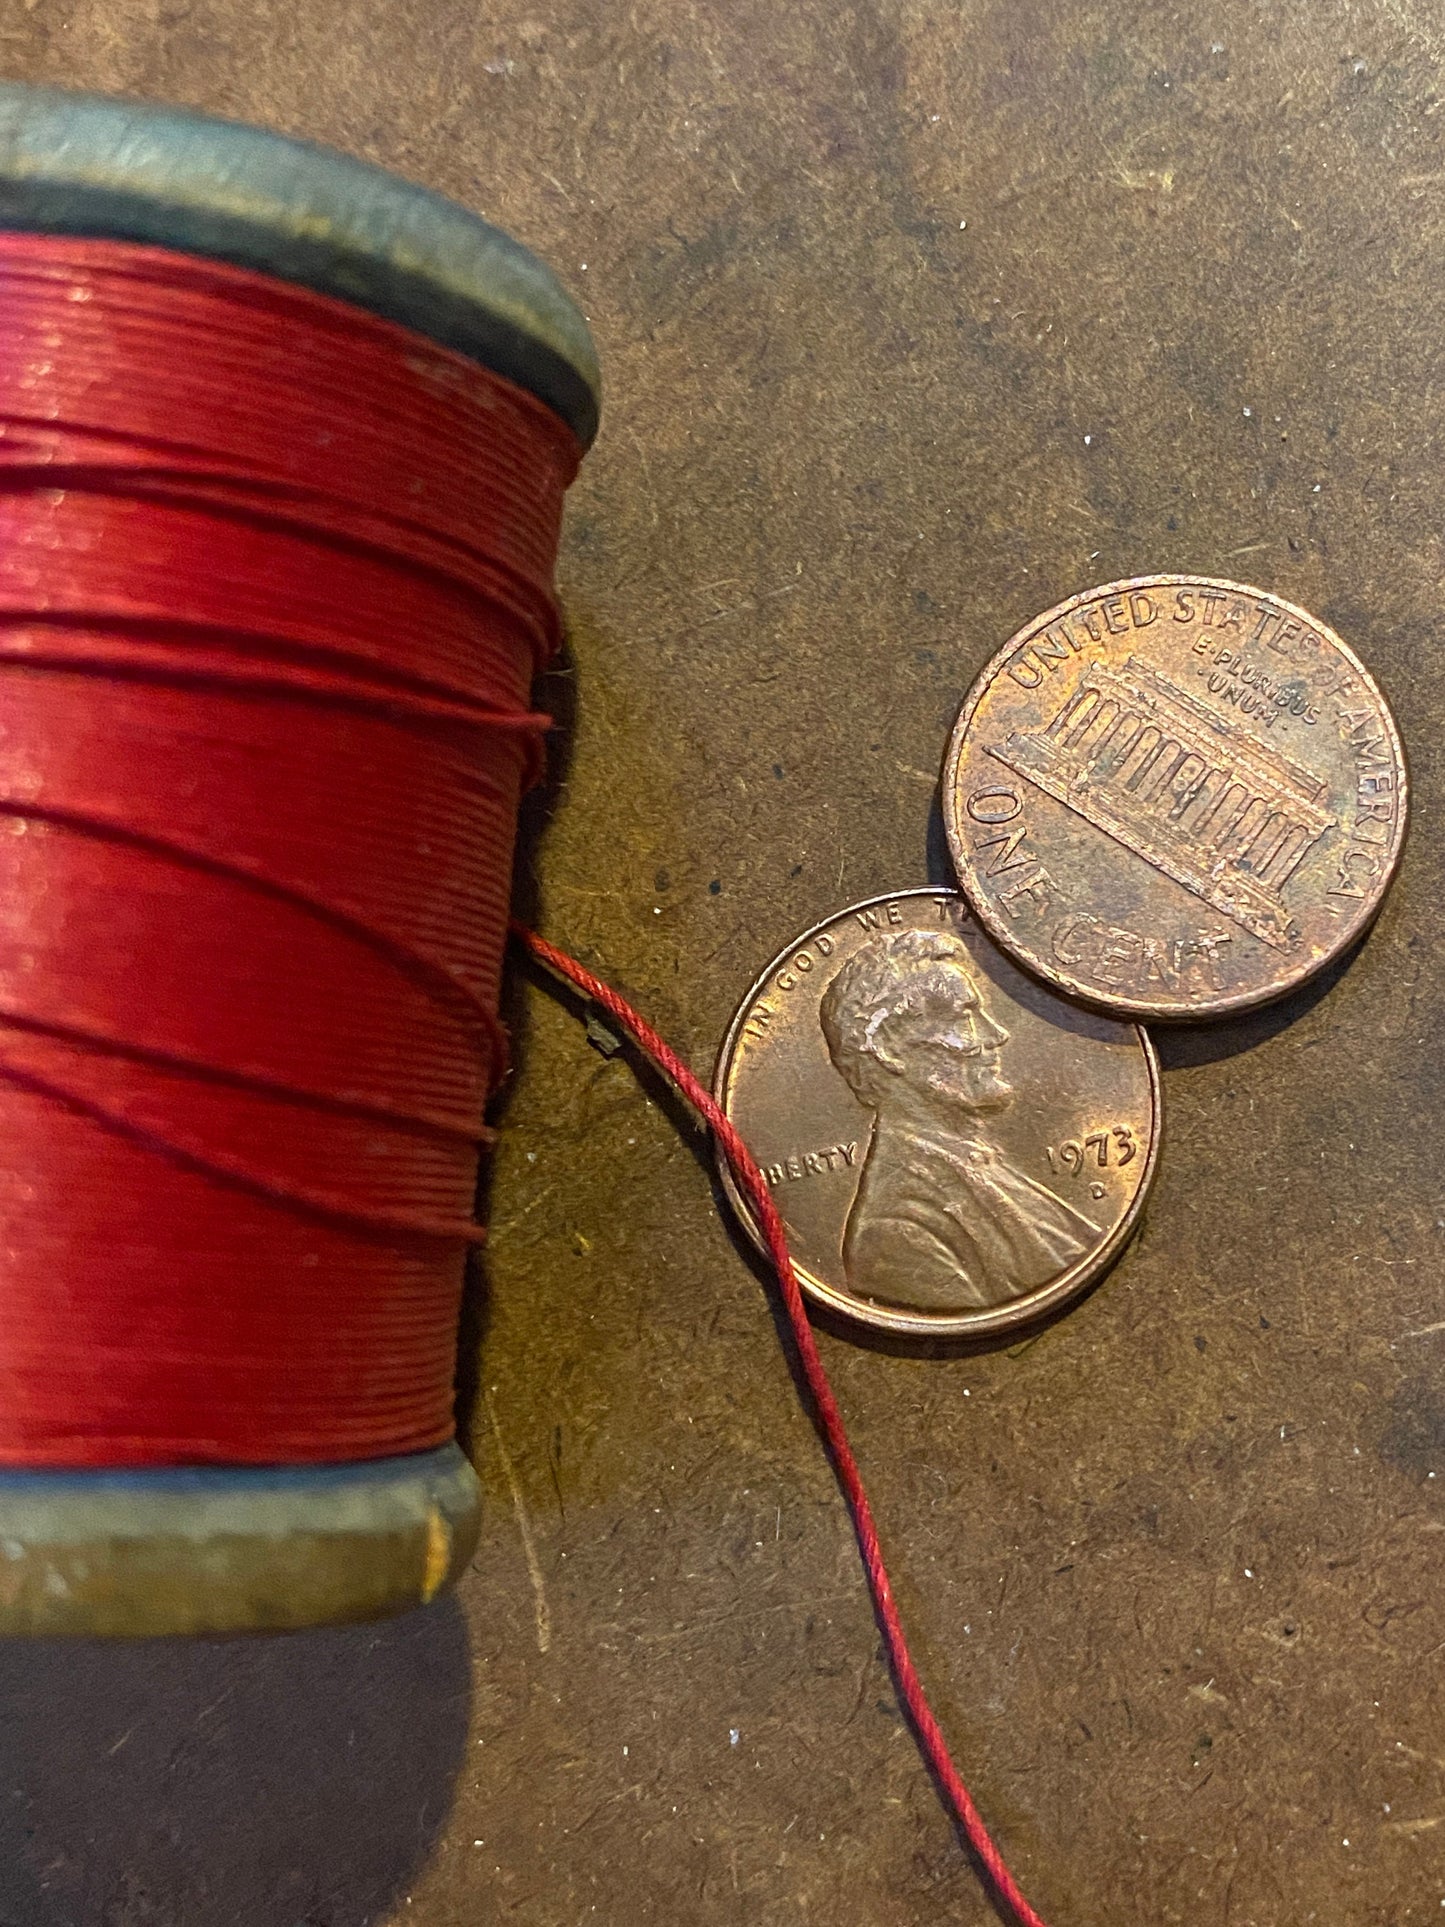 5 yards of heavy duty button and carpet utility thread / strong vintage cotton cord / repair, retie, reattach / durable sewing string